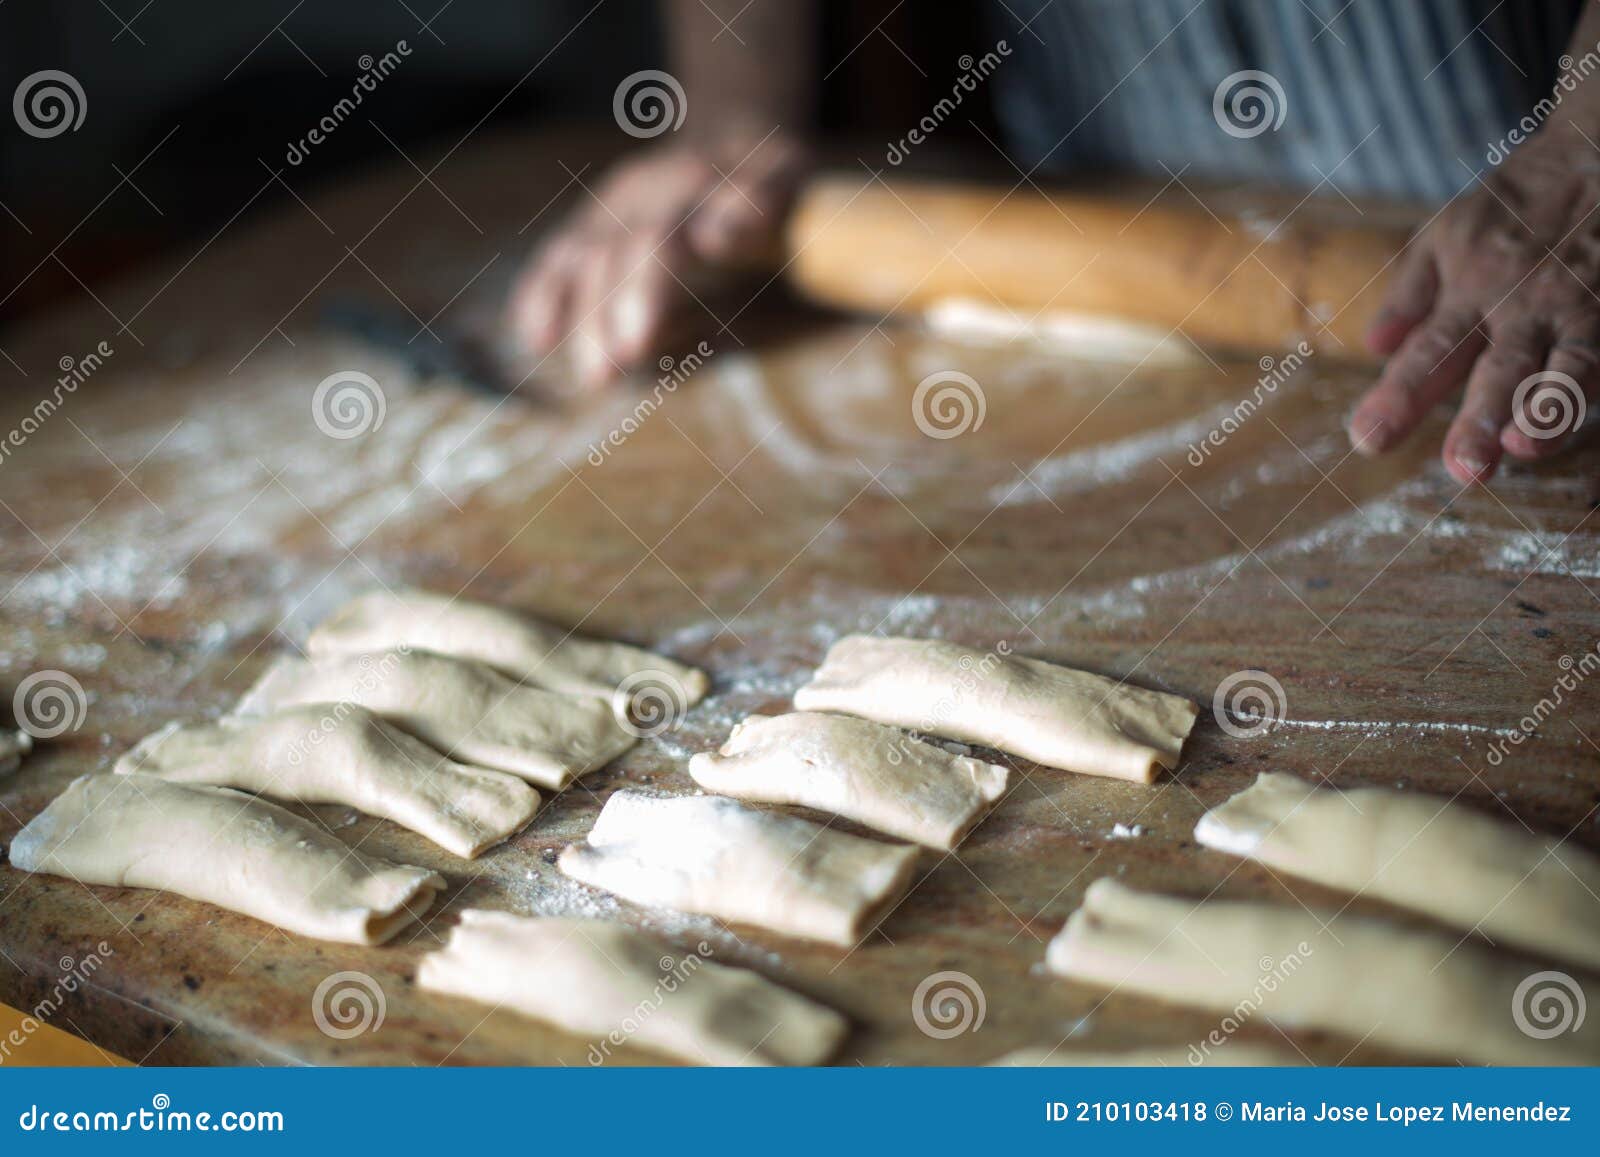 aged woman`s hands with a rolling pin preparing at home casadielles filled with nuts. tradicional gastronomy